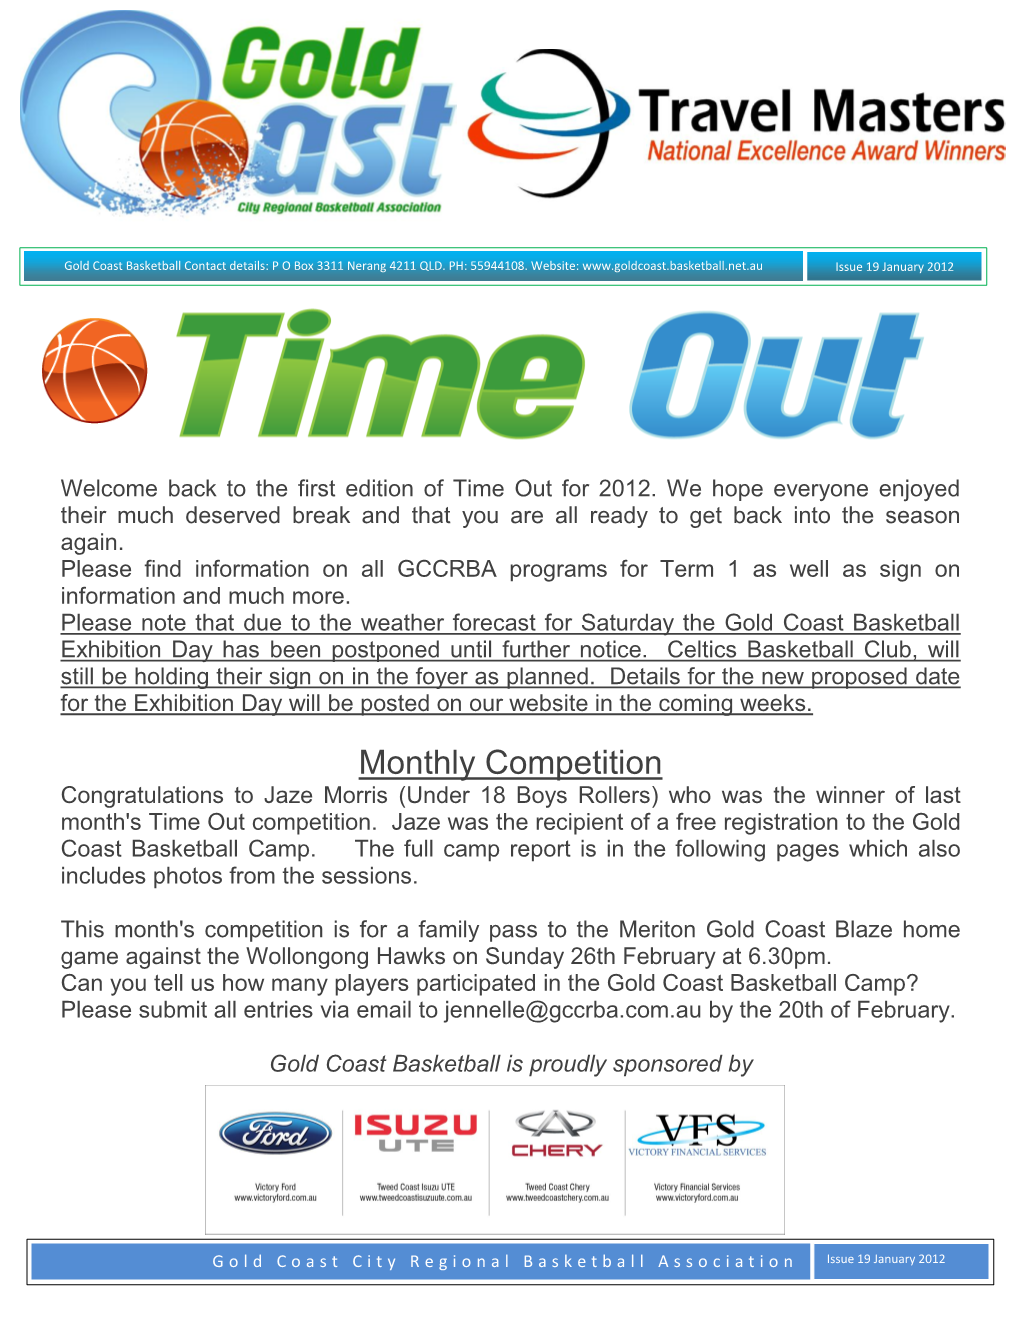 Monthly Competition Congratulations to Jaze Morris (Under 18 Boys Rollers) Who Was the Winner of Last Month's Time out Competition